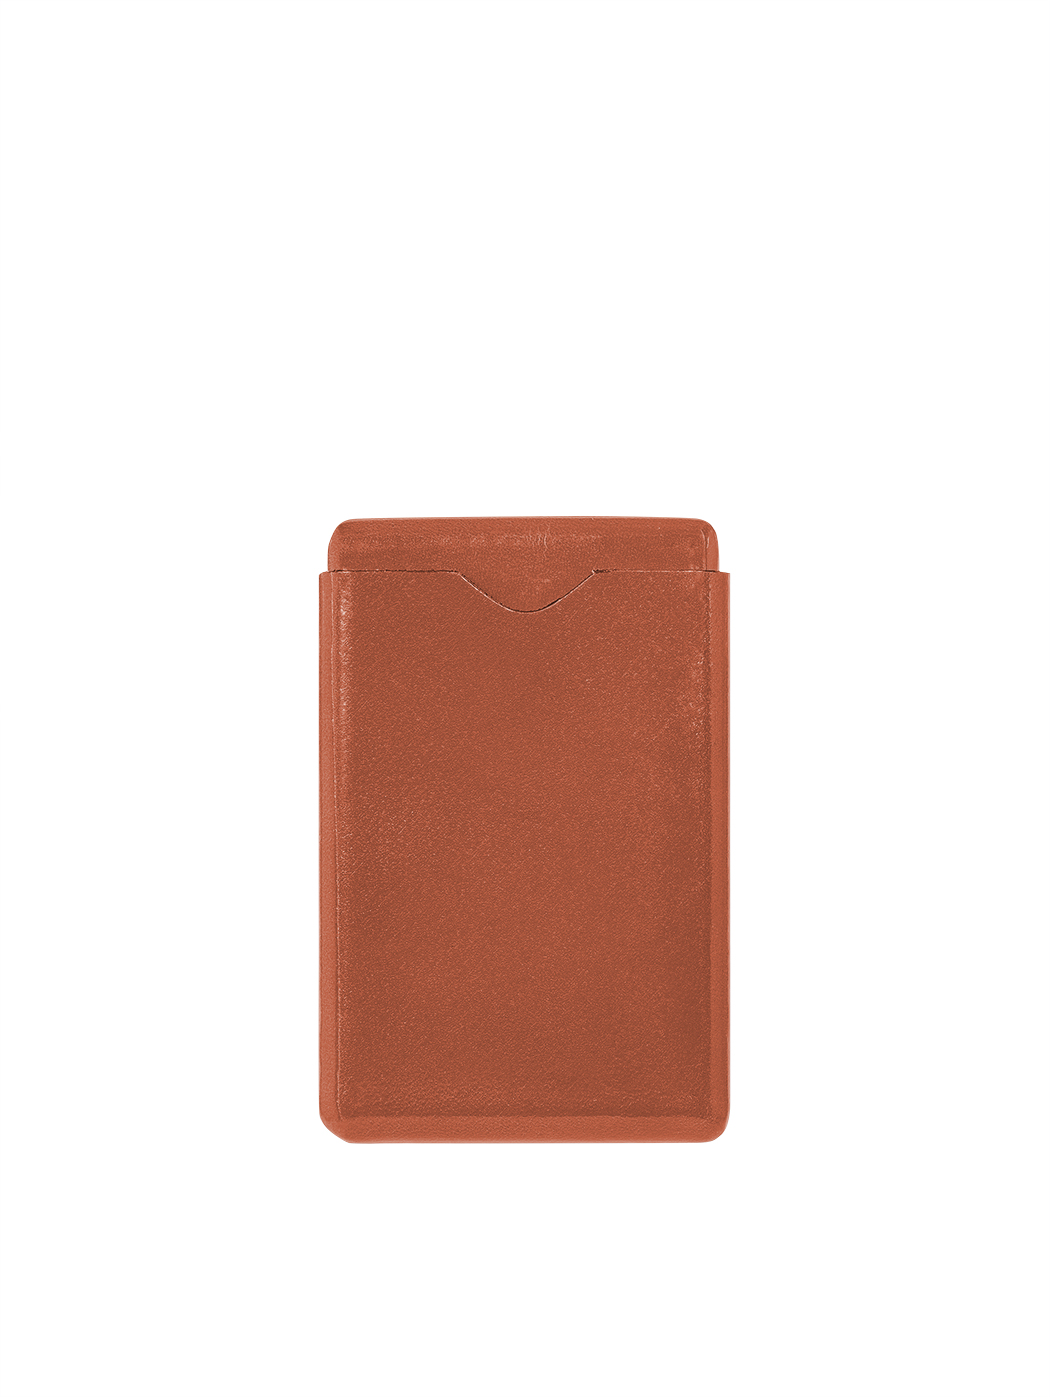 Business Card Holder Molded Leather Brown